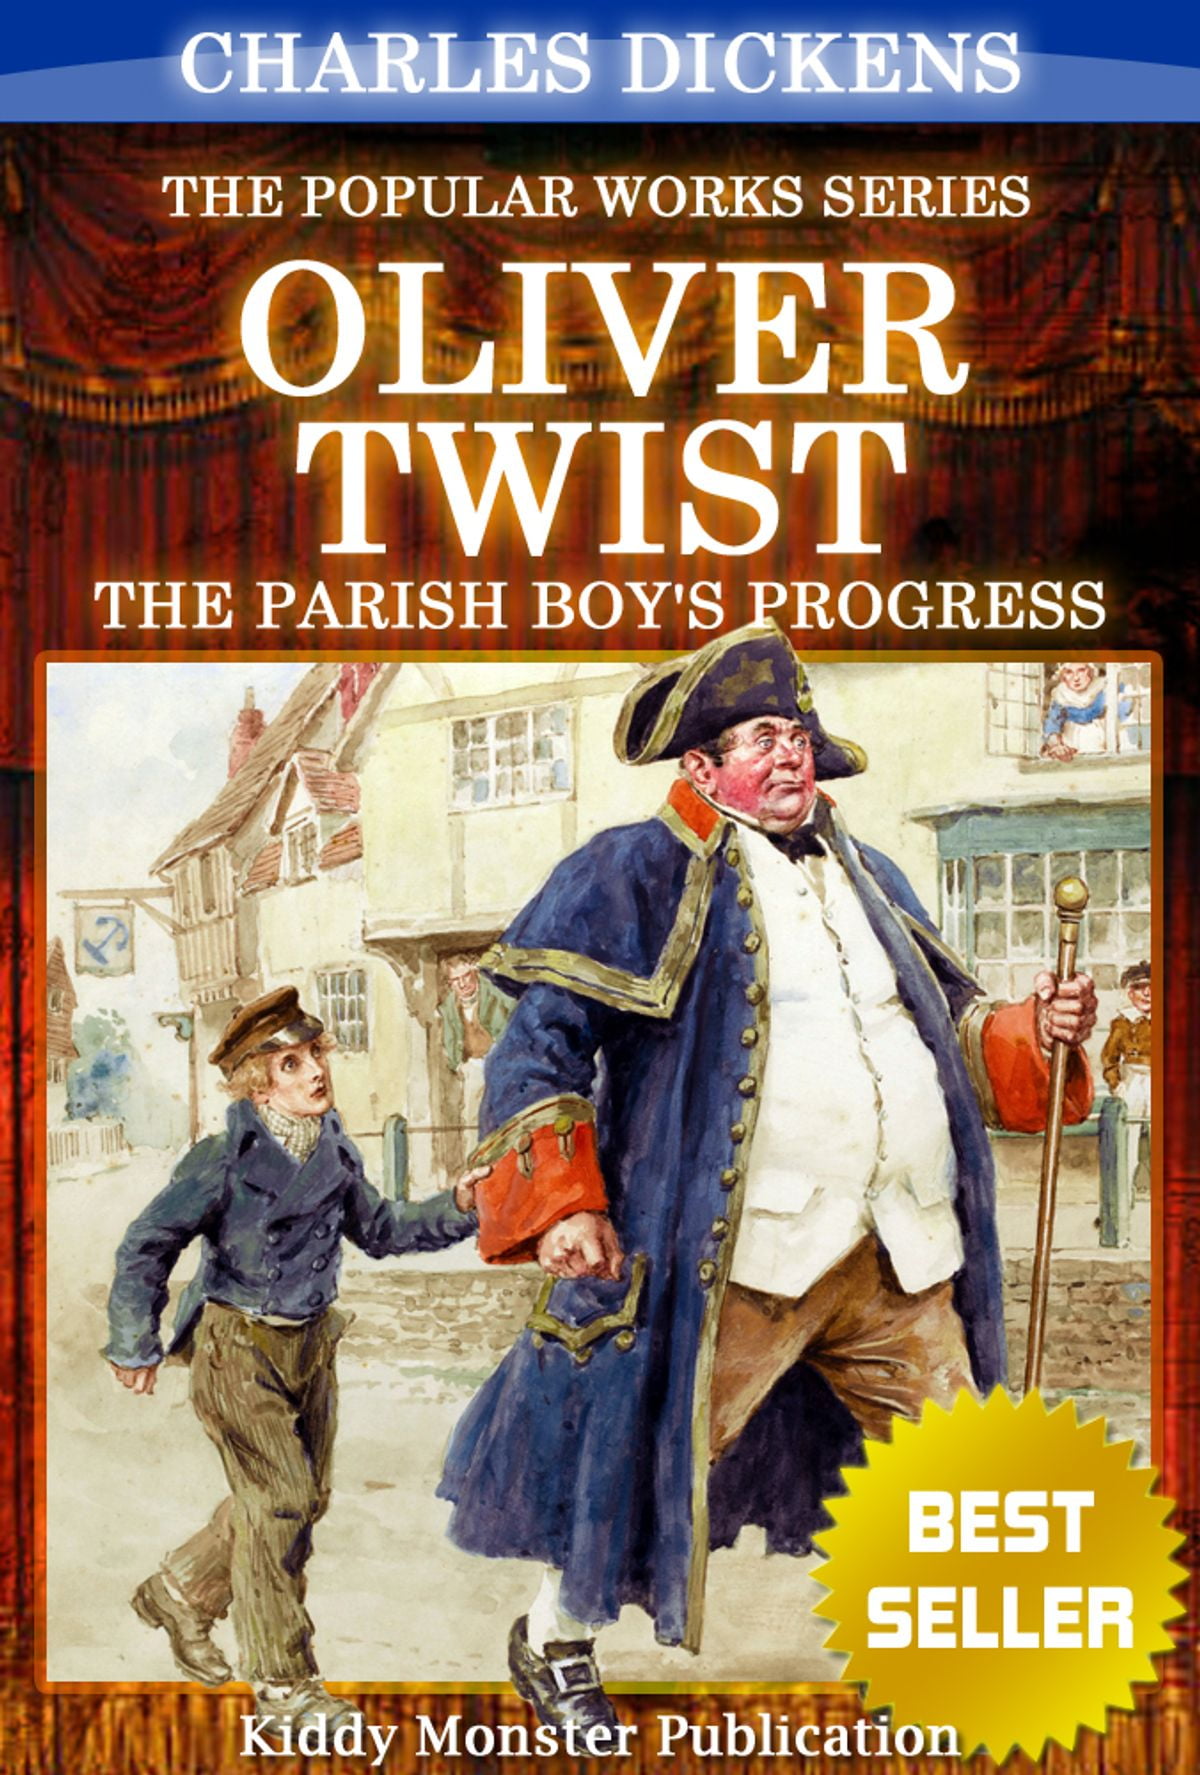 charles dickens biography oliver twist